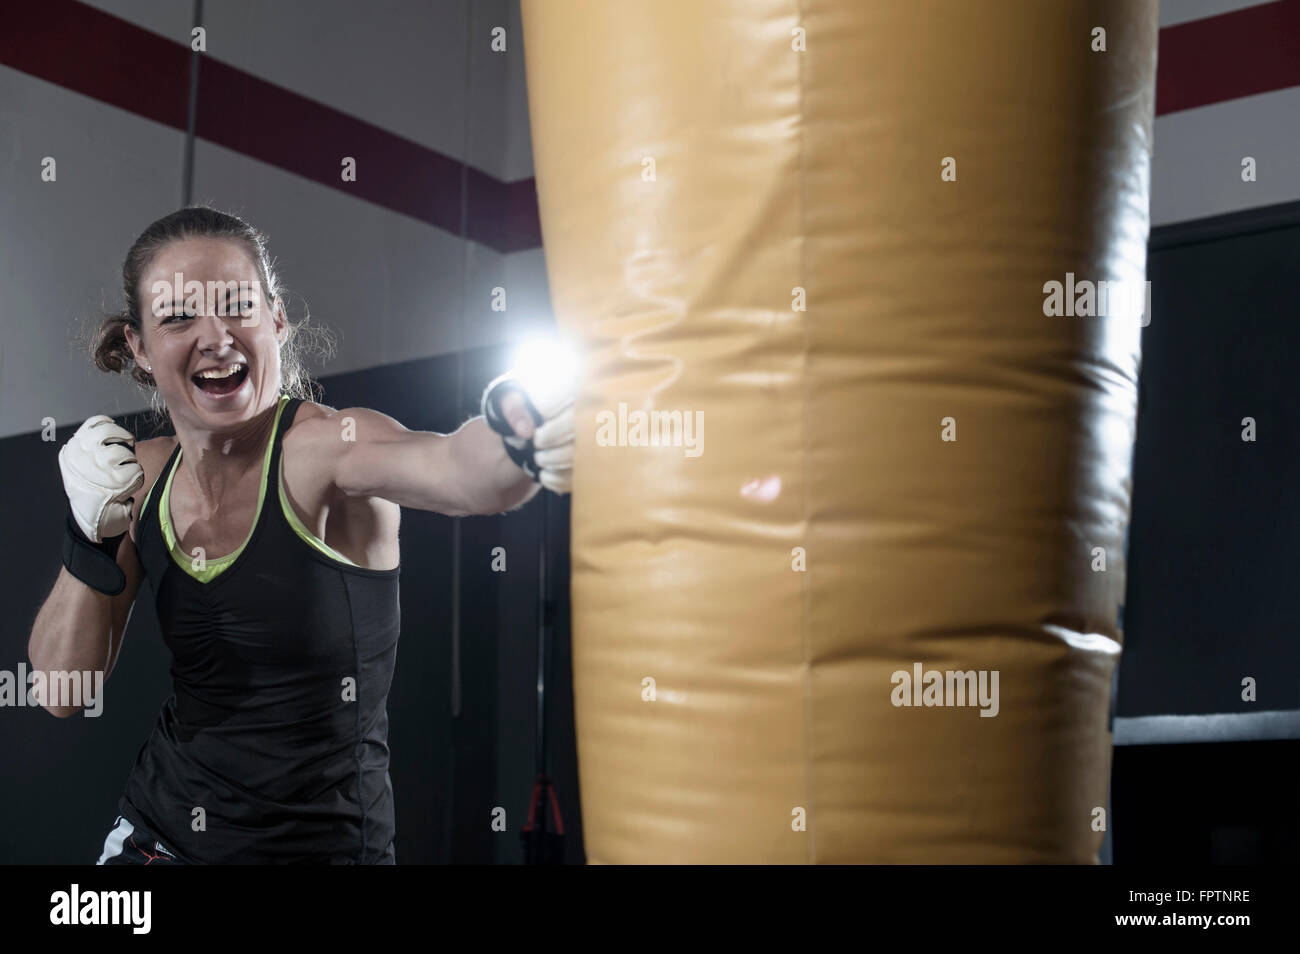 Sportswoman doing strength training by punching on punch bag in the gym, Bavaria, Germany Stock Photo